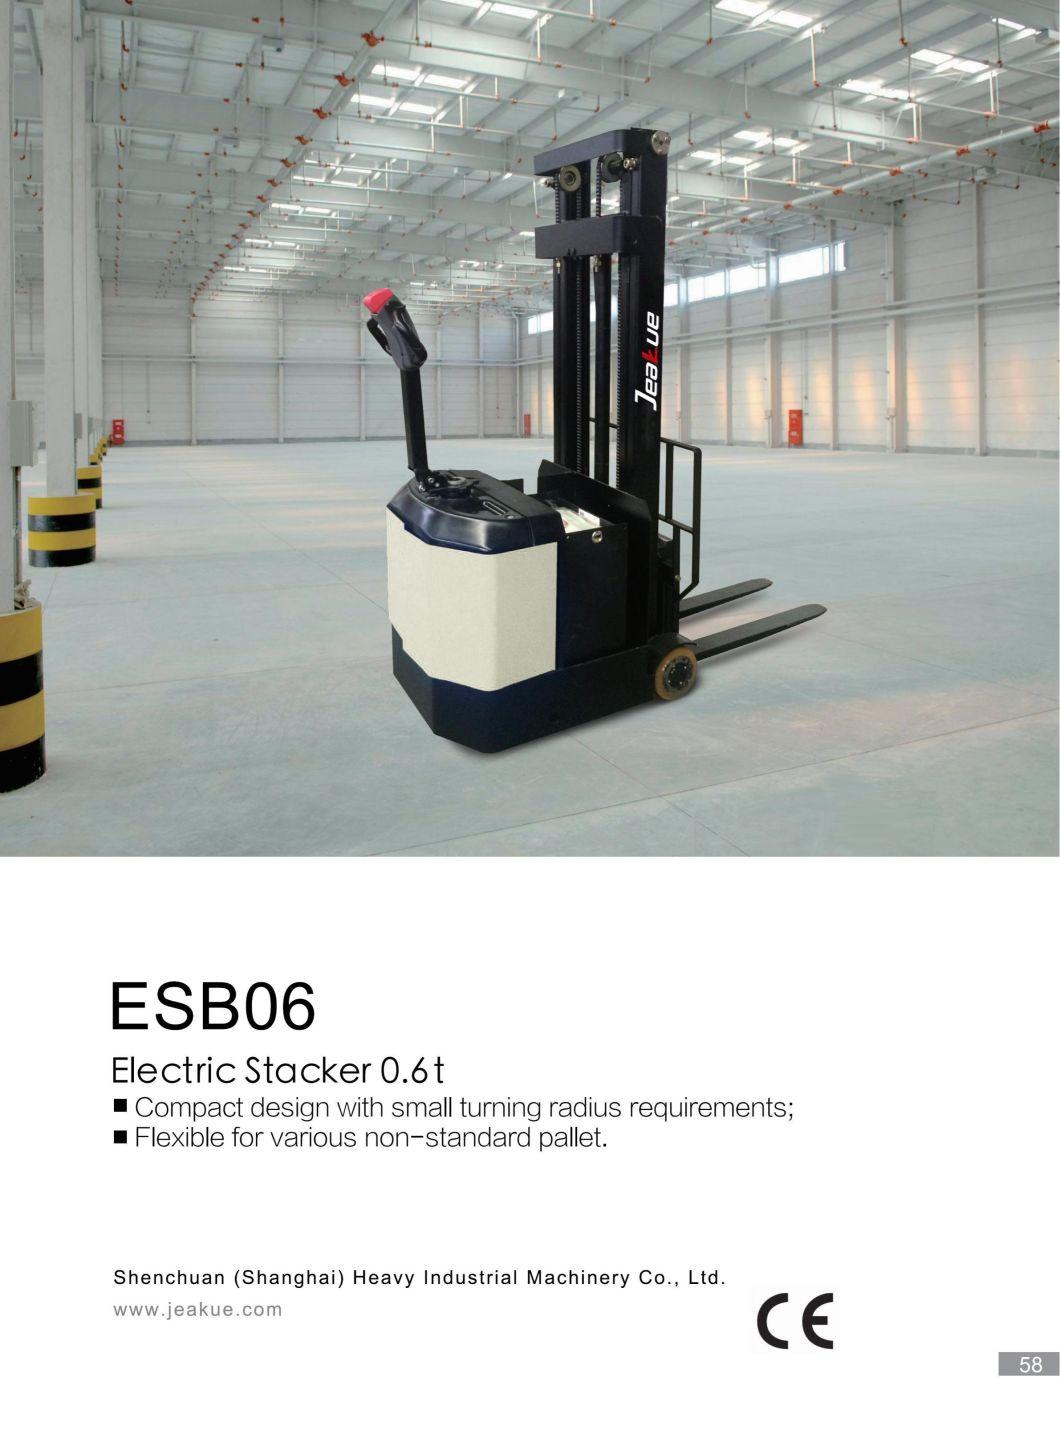 600kg Material Handling Equipment Battery Powered Pallet Stacker Electric Counterbalance Stacker